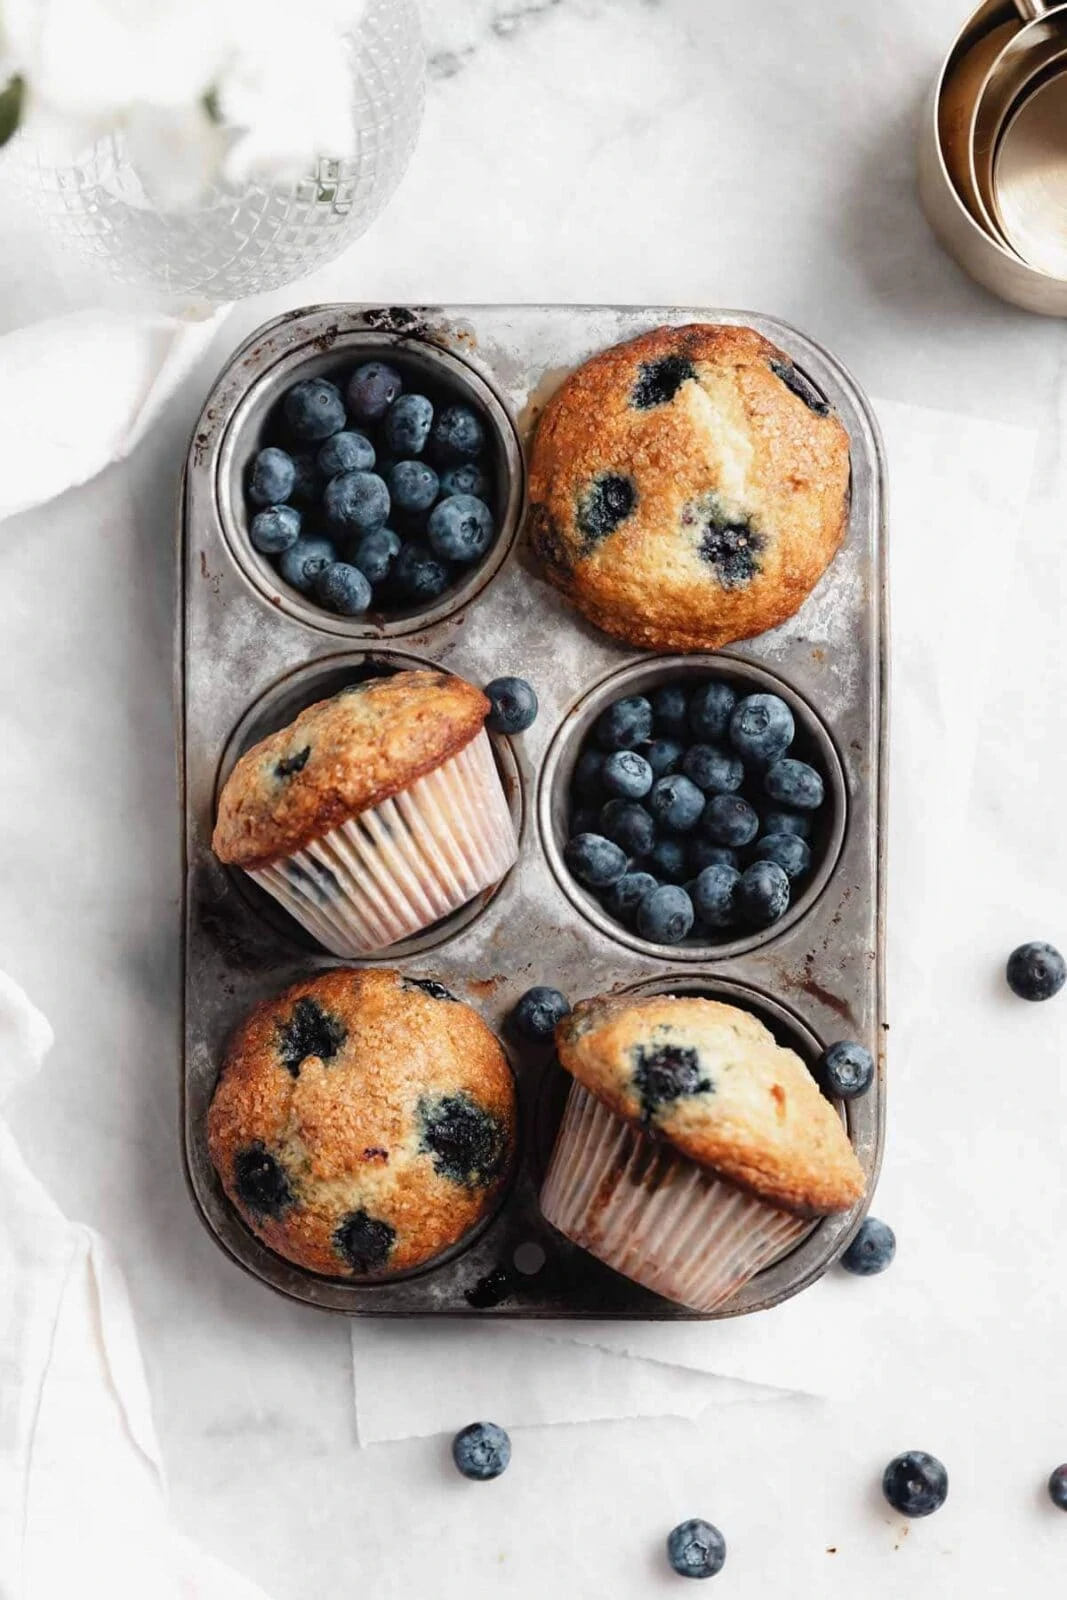 How to Make Jumbo Blueberry Muffins with Buttermilk